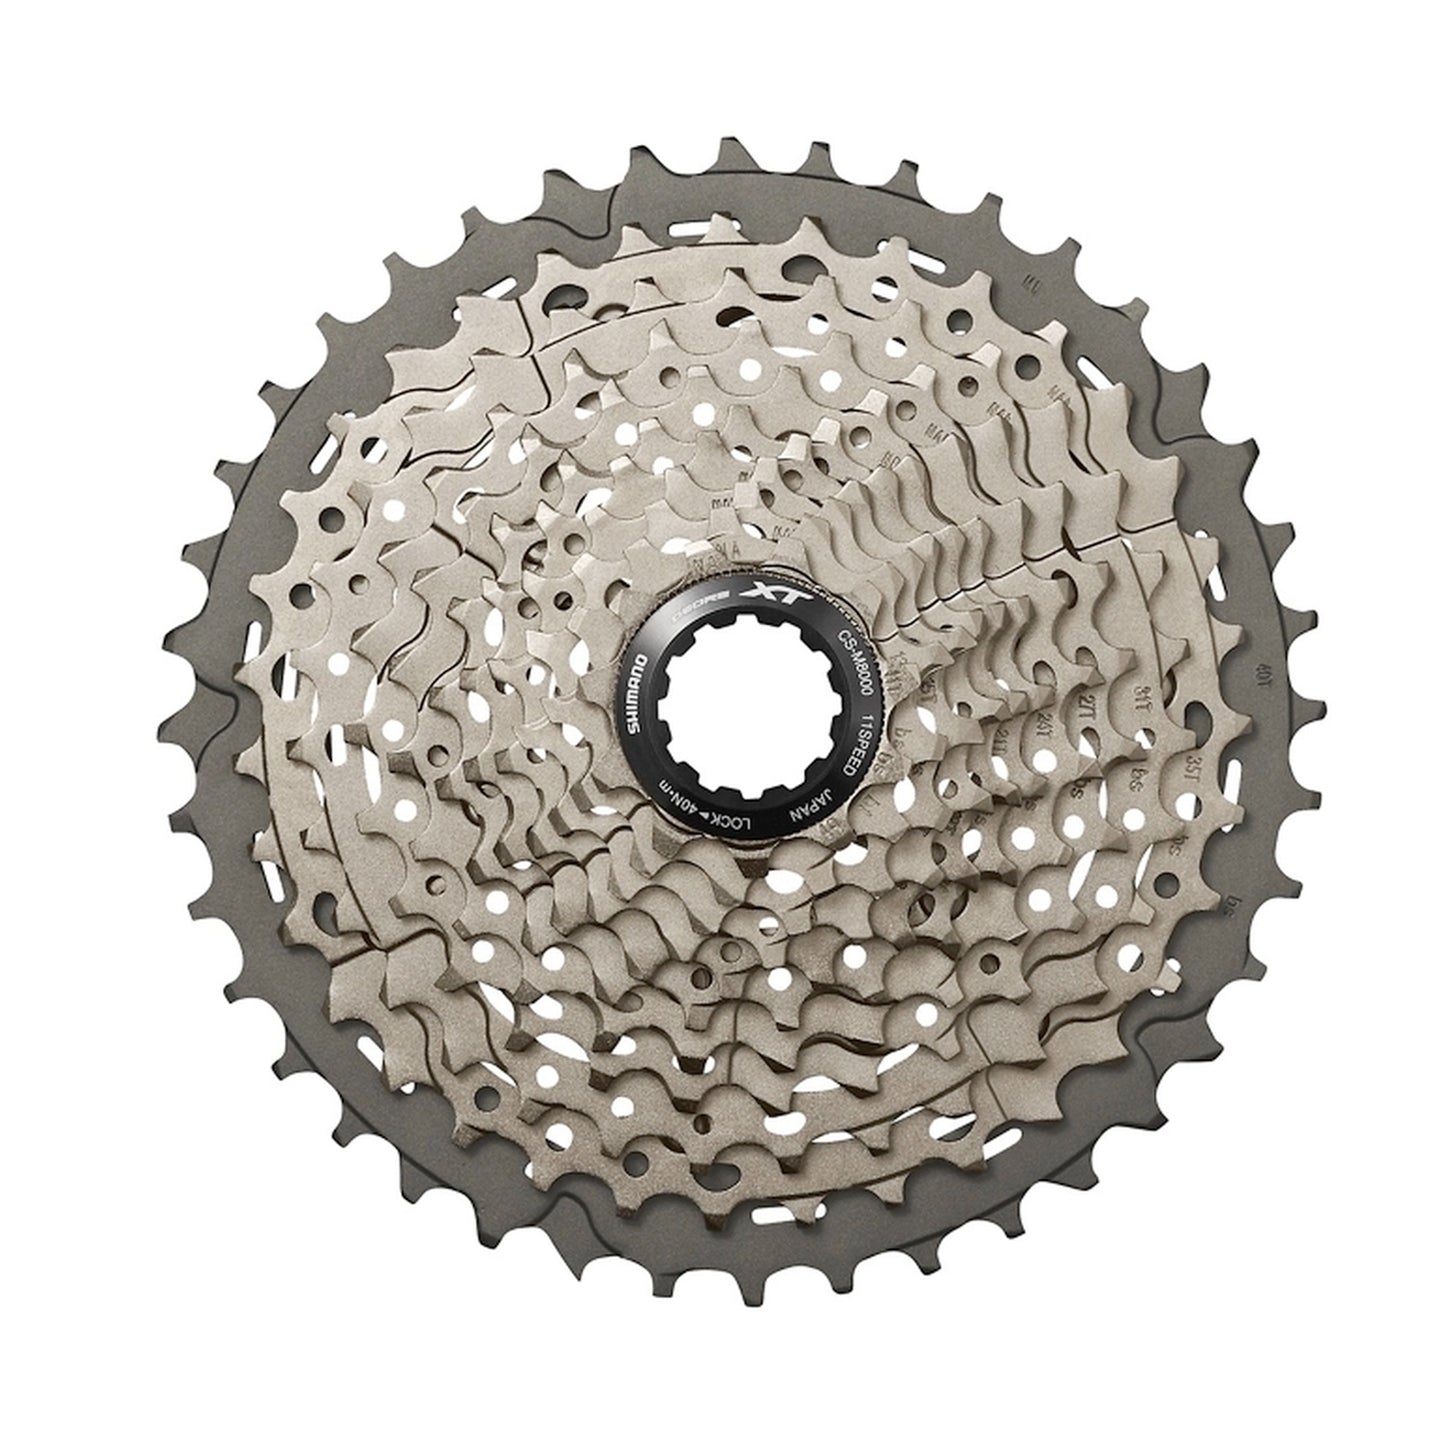 Shimano CS-M8000 Deore XT 11 Speed Cassette 11-42T buy online at Woolys Wheels with free delivery